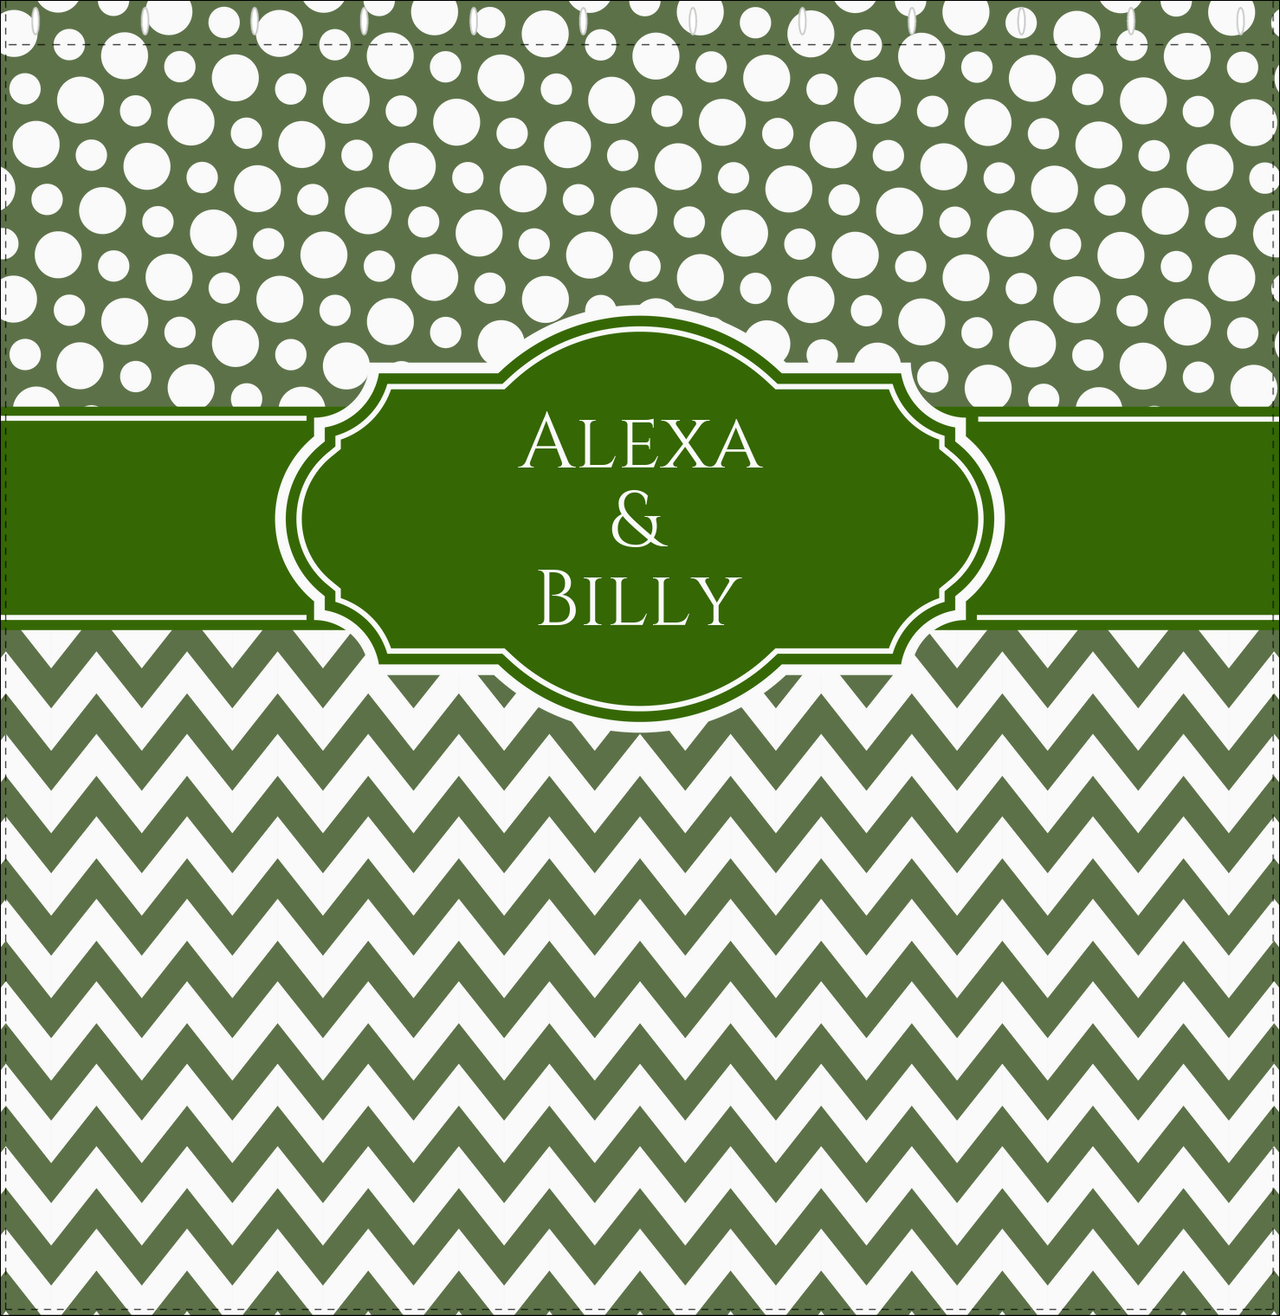 Personalized Polka Dots and Chevron III Shower Curtain - Green and White - Fancy Nameplate - Decorate View